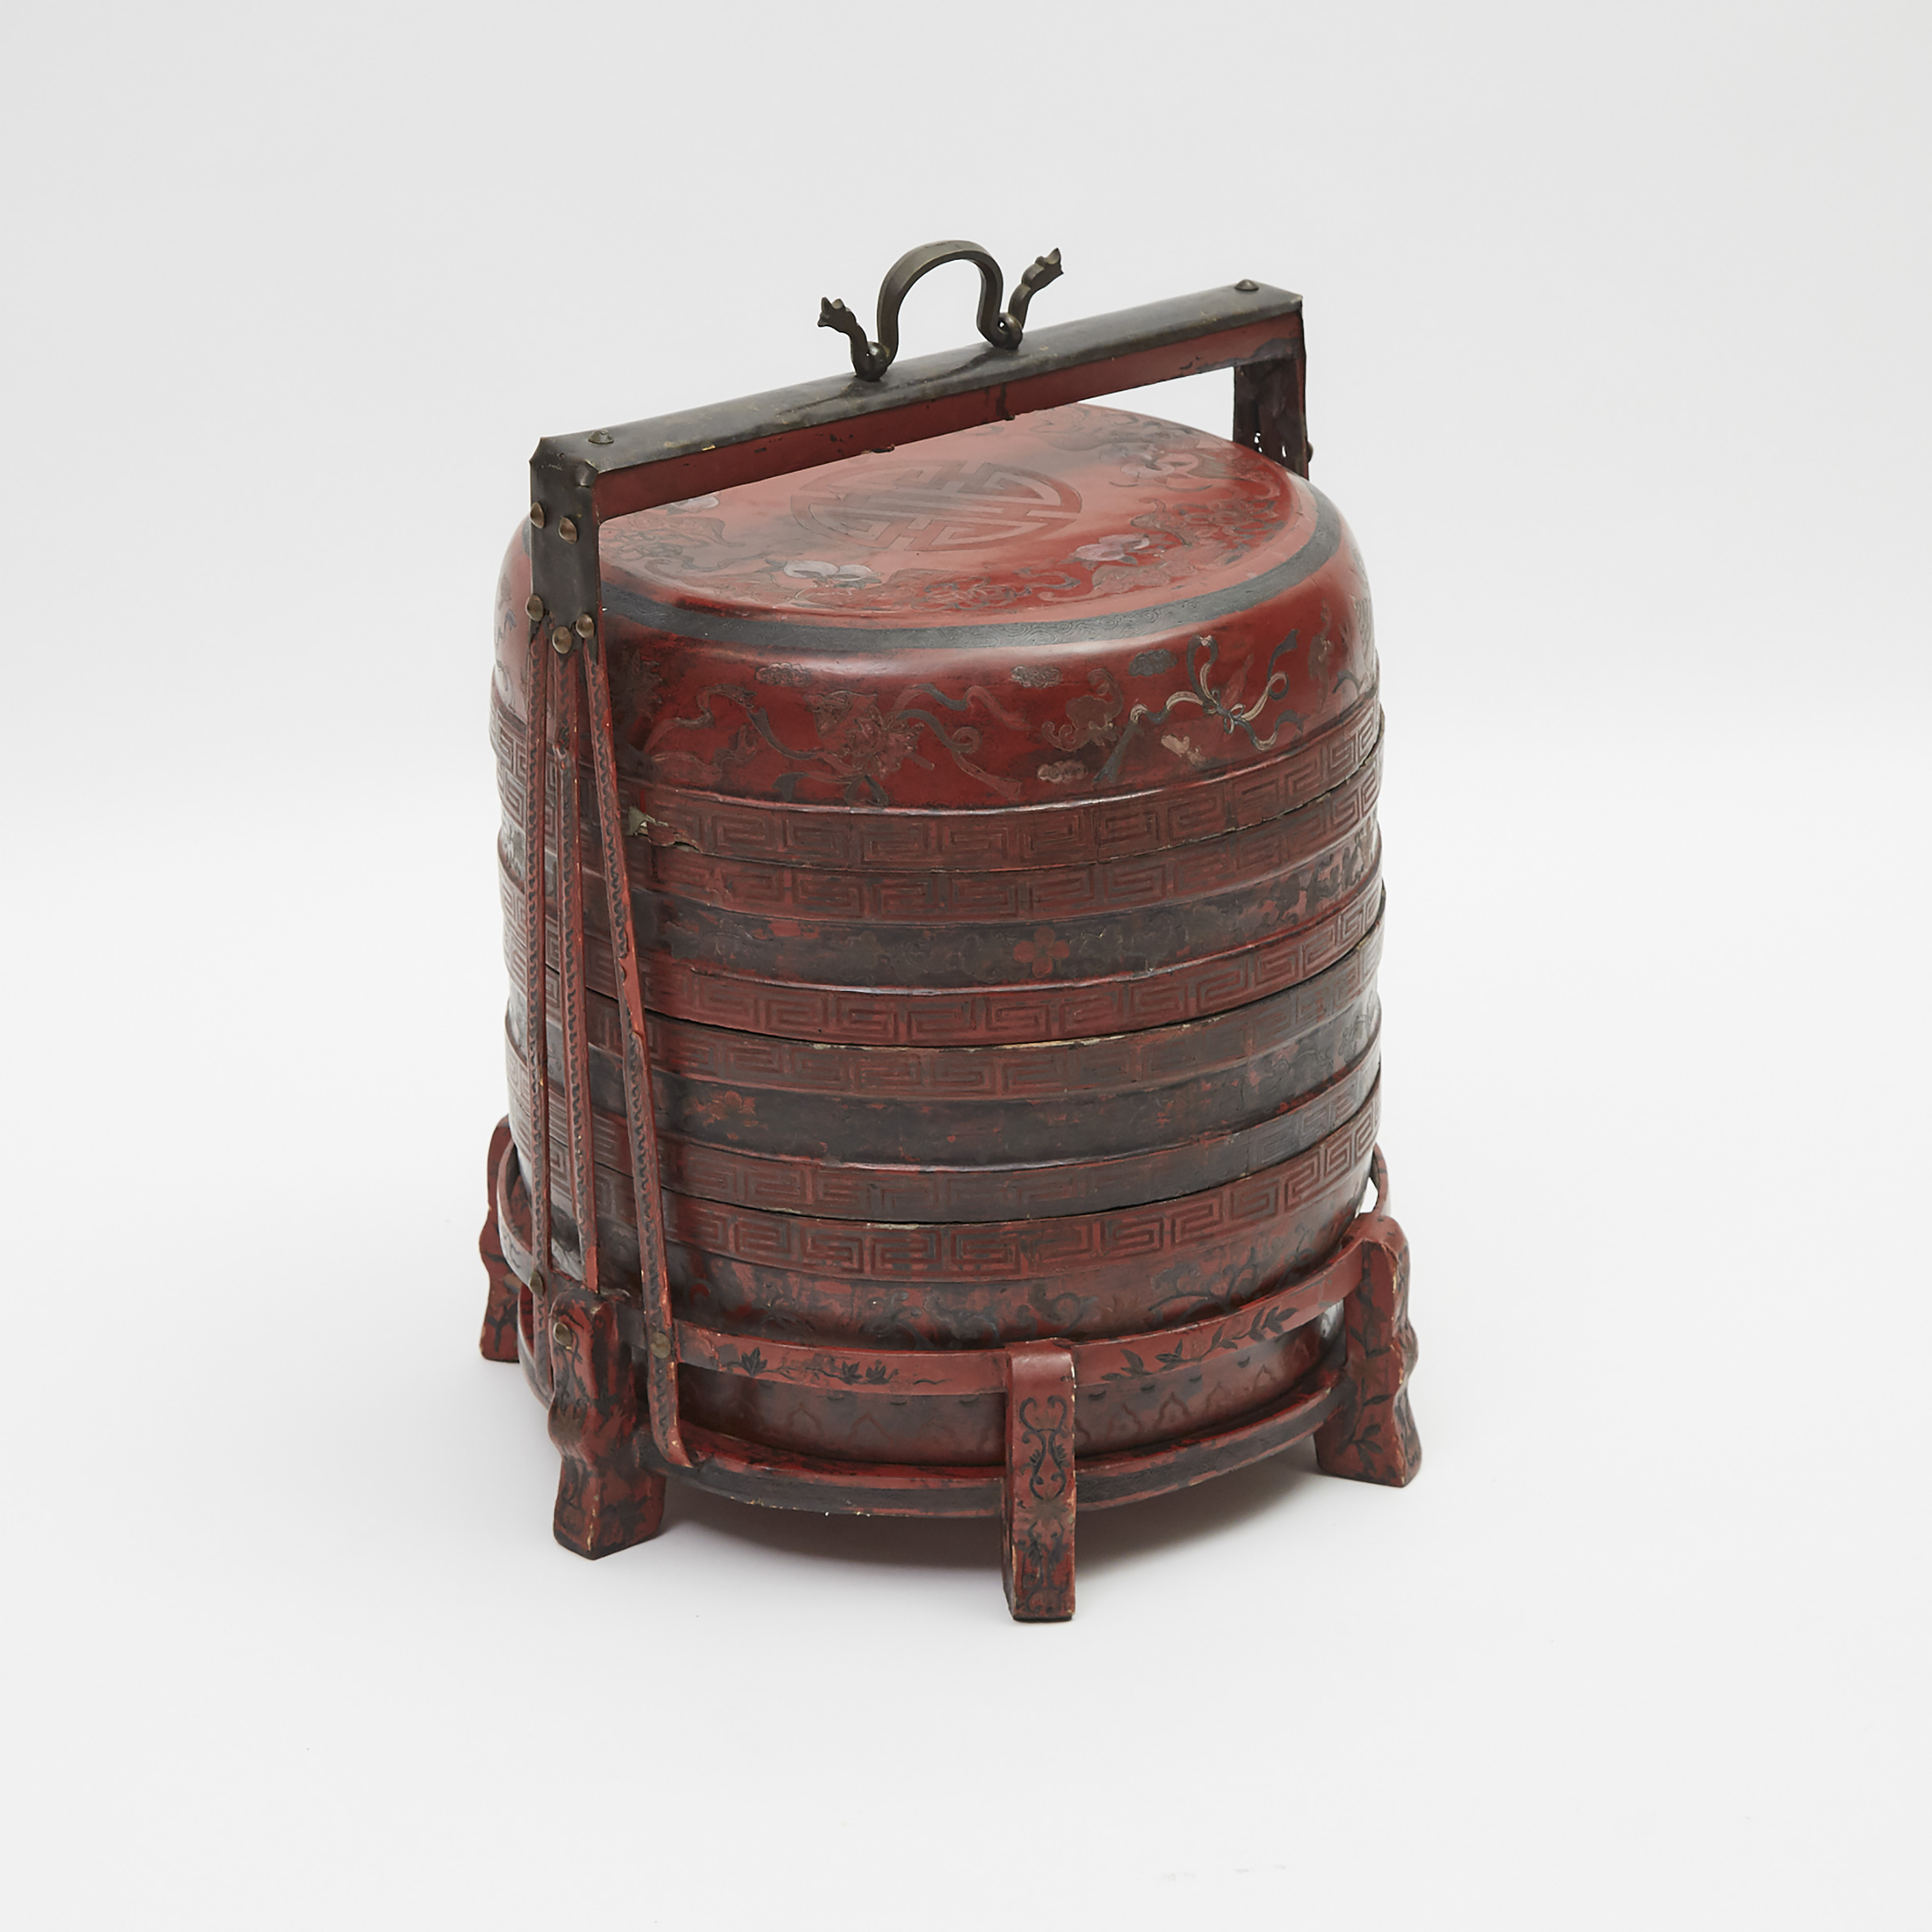 A Red Lacquer Wedding Basket, 19th Century